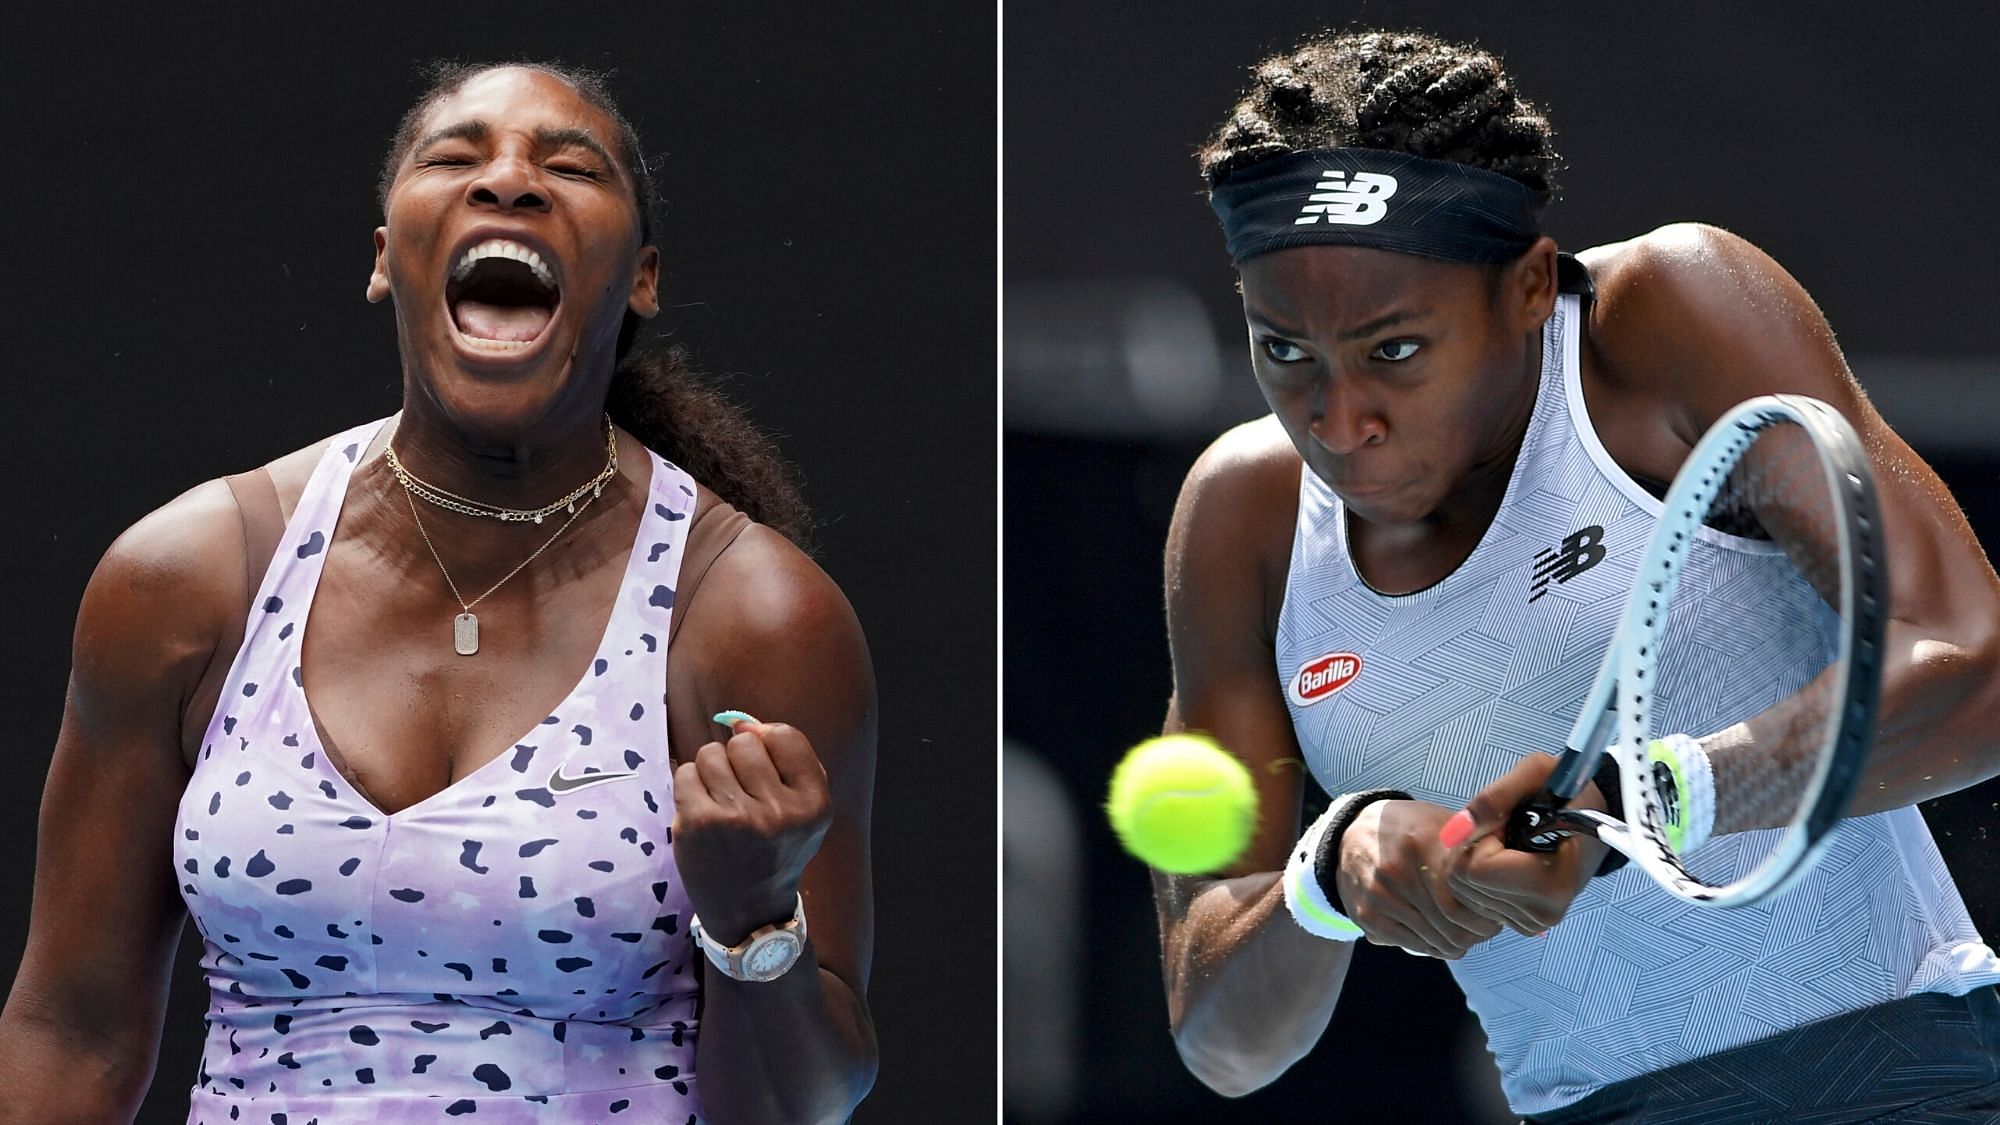 Teenager Coco Gauff was included in the U.S. Fed Cup team for the first time on Tuesday, joining the likes of Serena Williams for a qualifying series against Latvia next week.